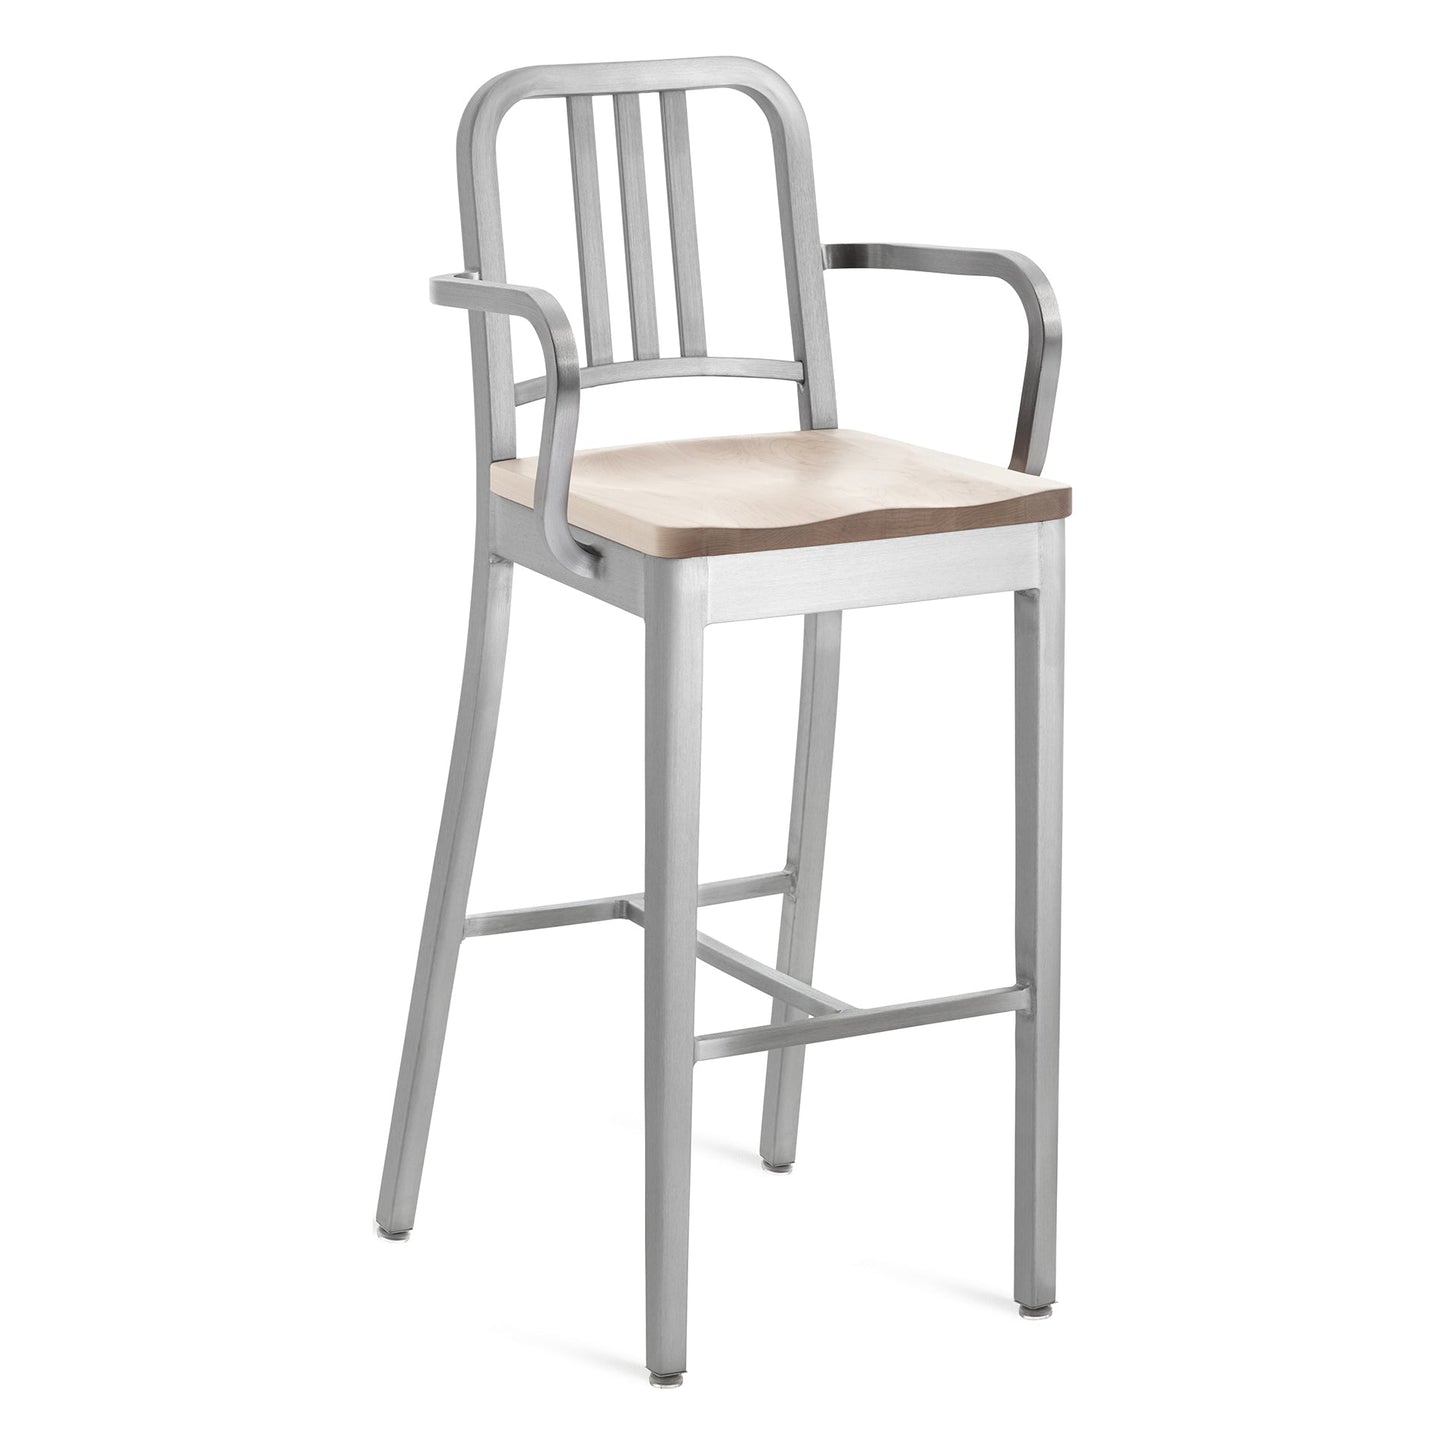 Navy Stool with Arms & Wood Seat